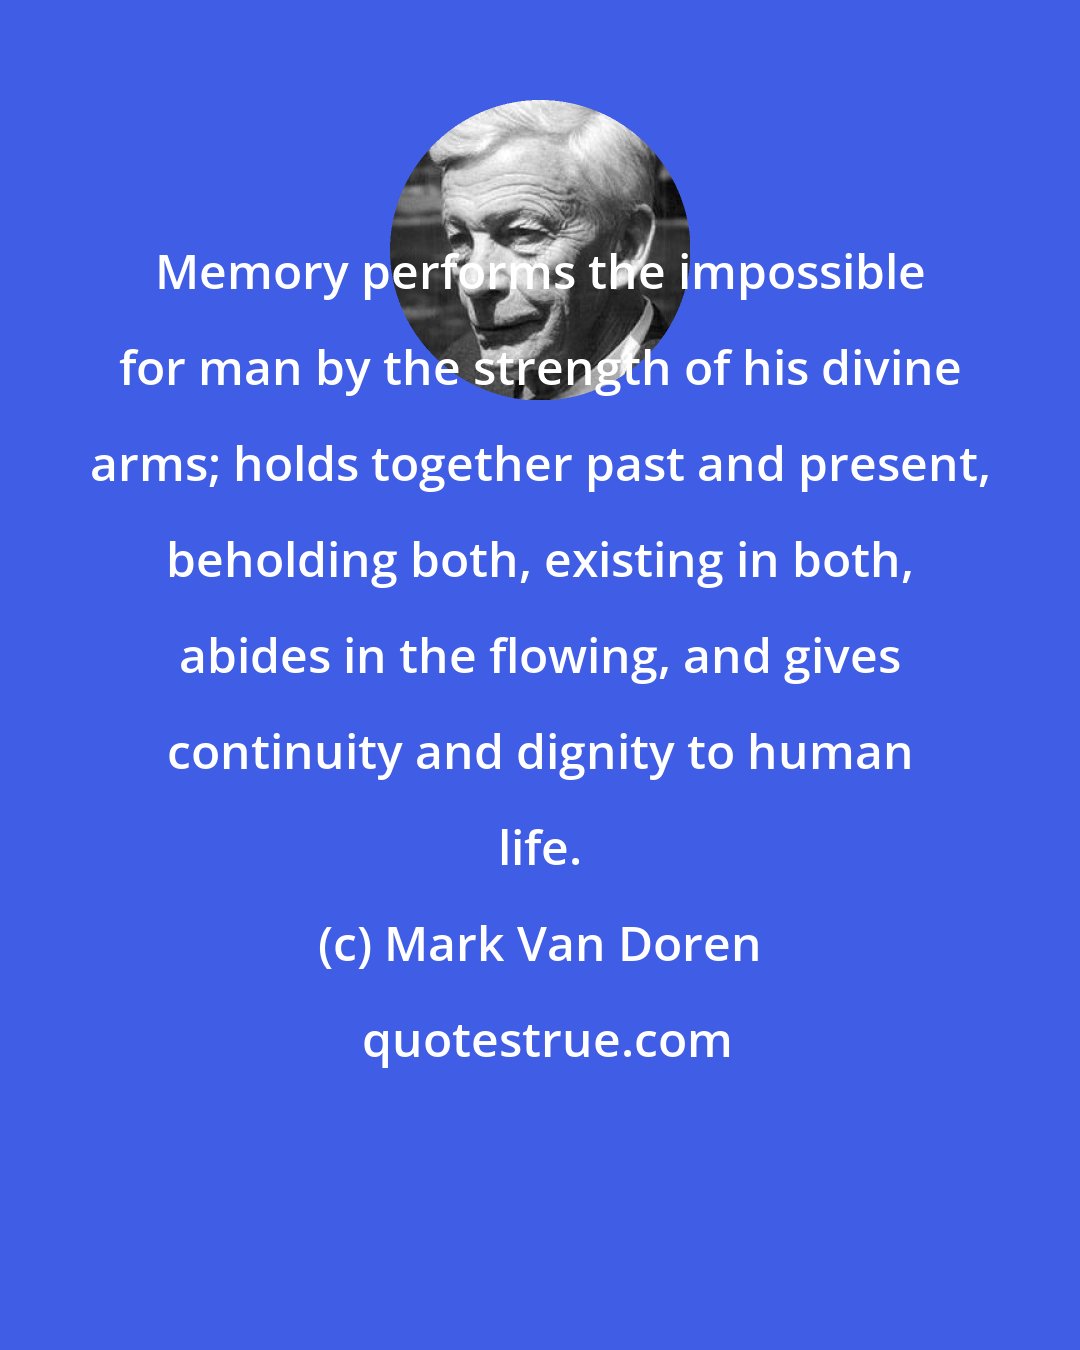 Mark Van Doren: Memory performs the impossible for man by the strength of his divine arms; holds together past and present, beholding both, existing in both, abides in the flowing, and gives continuity and dignity to human life.